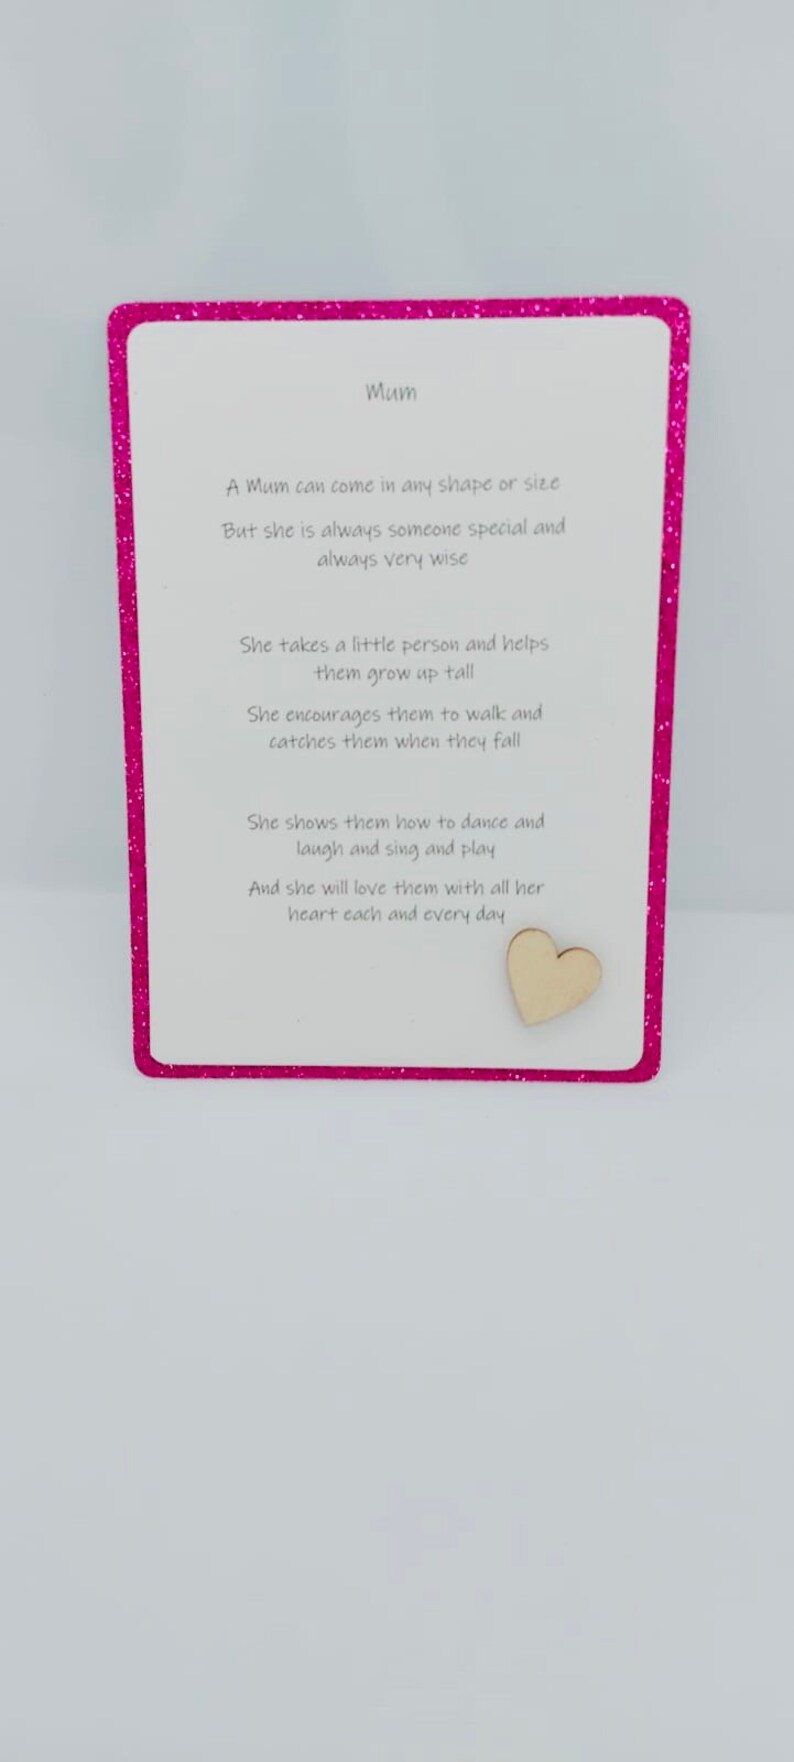 Mother's Day Card/ Card for Mum/ Postcard Style Card/ Birthday Card for Mum/ Mum Poem/ Mum Keepsake/ Gift for Mum image 8